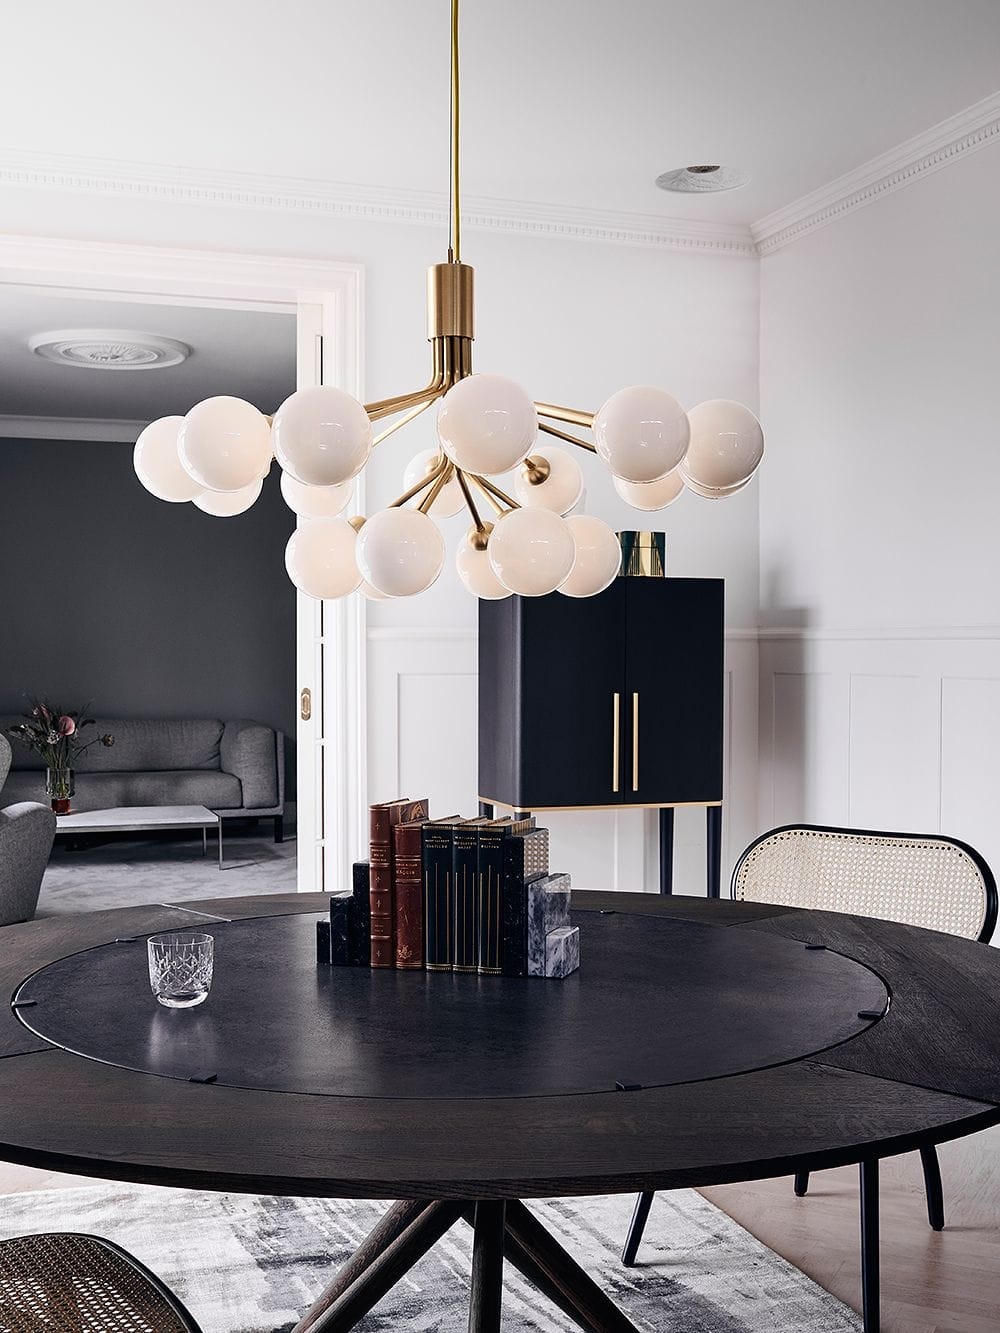 brass multi bulb pendant light over round dining table from finnish design shop